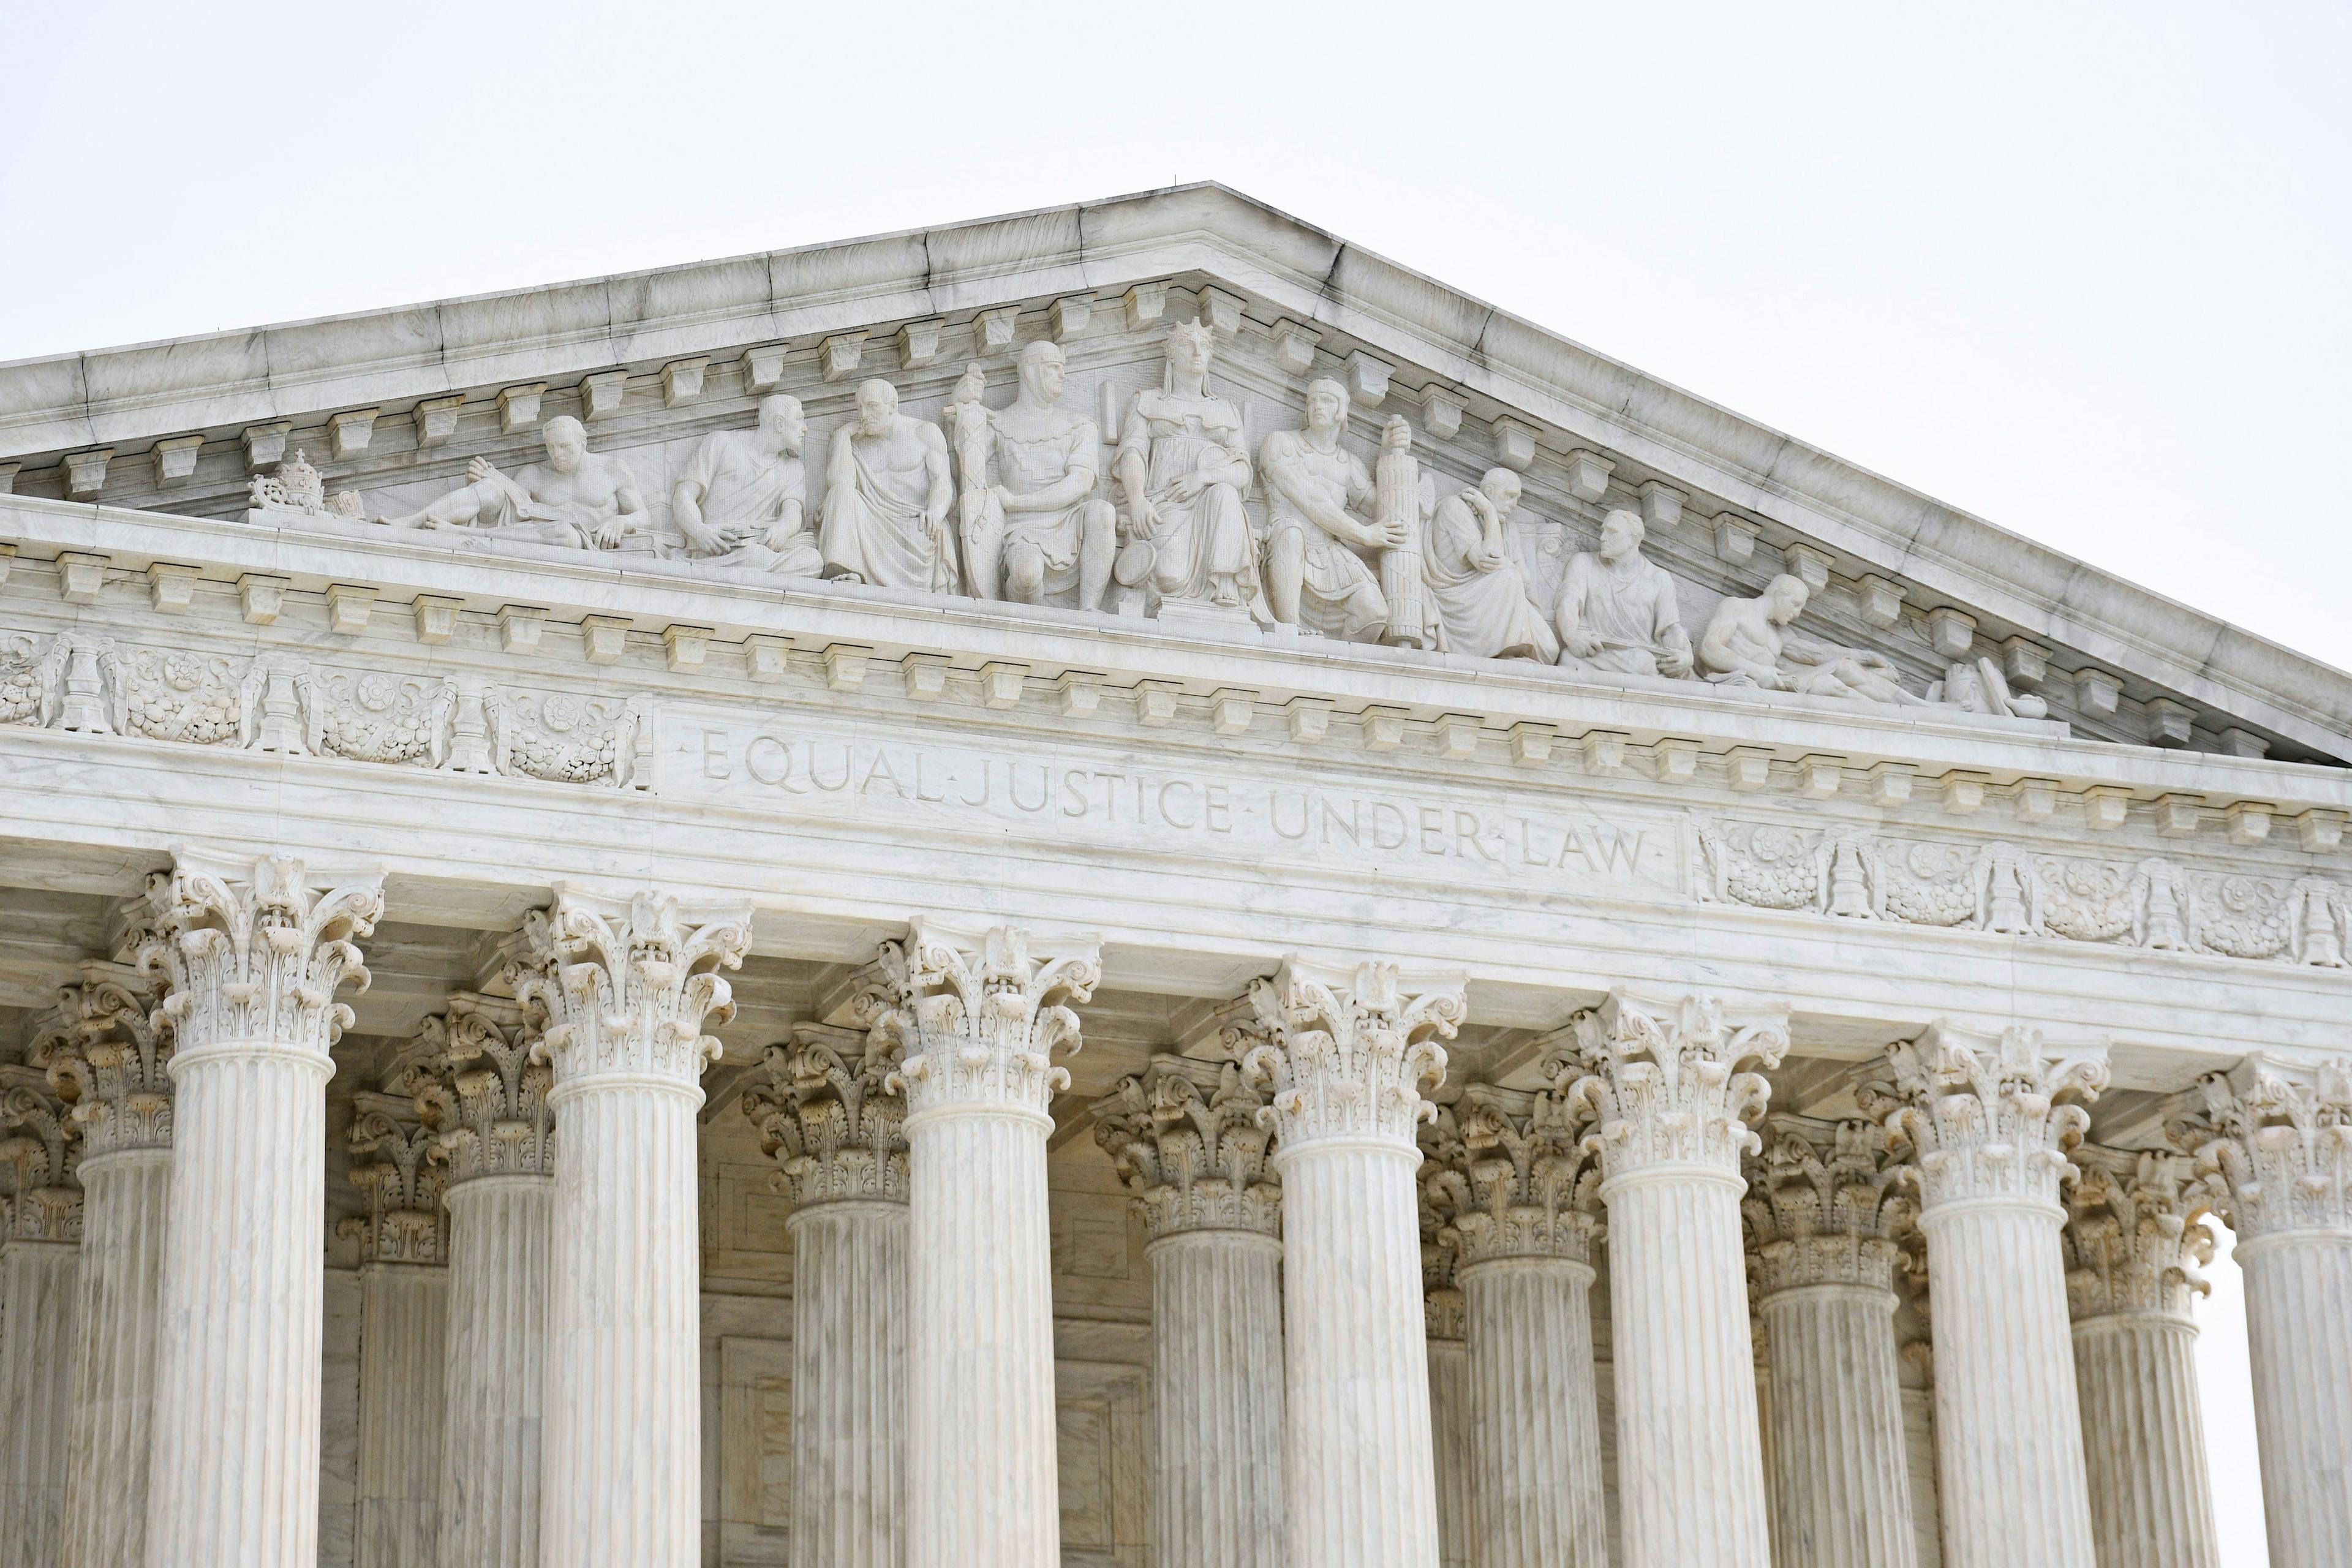 Health groups denounce Supreme Court ruling on affirmative action in college admissions